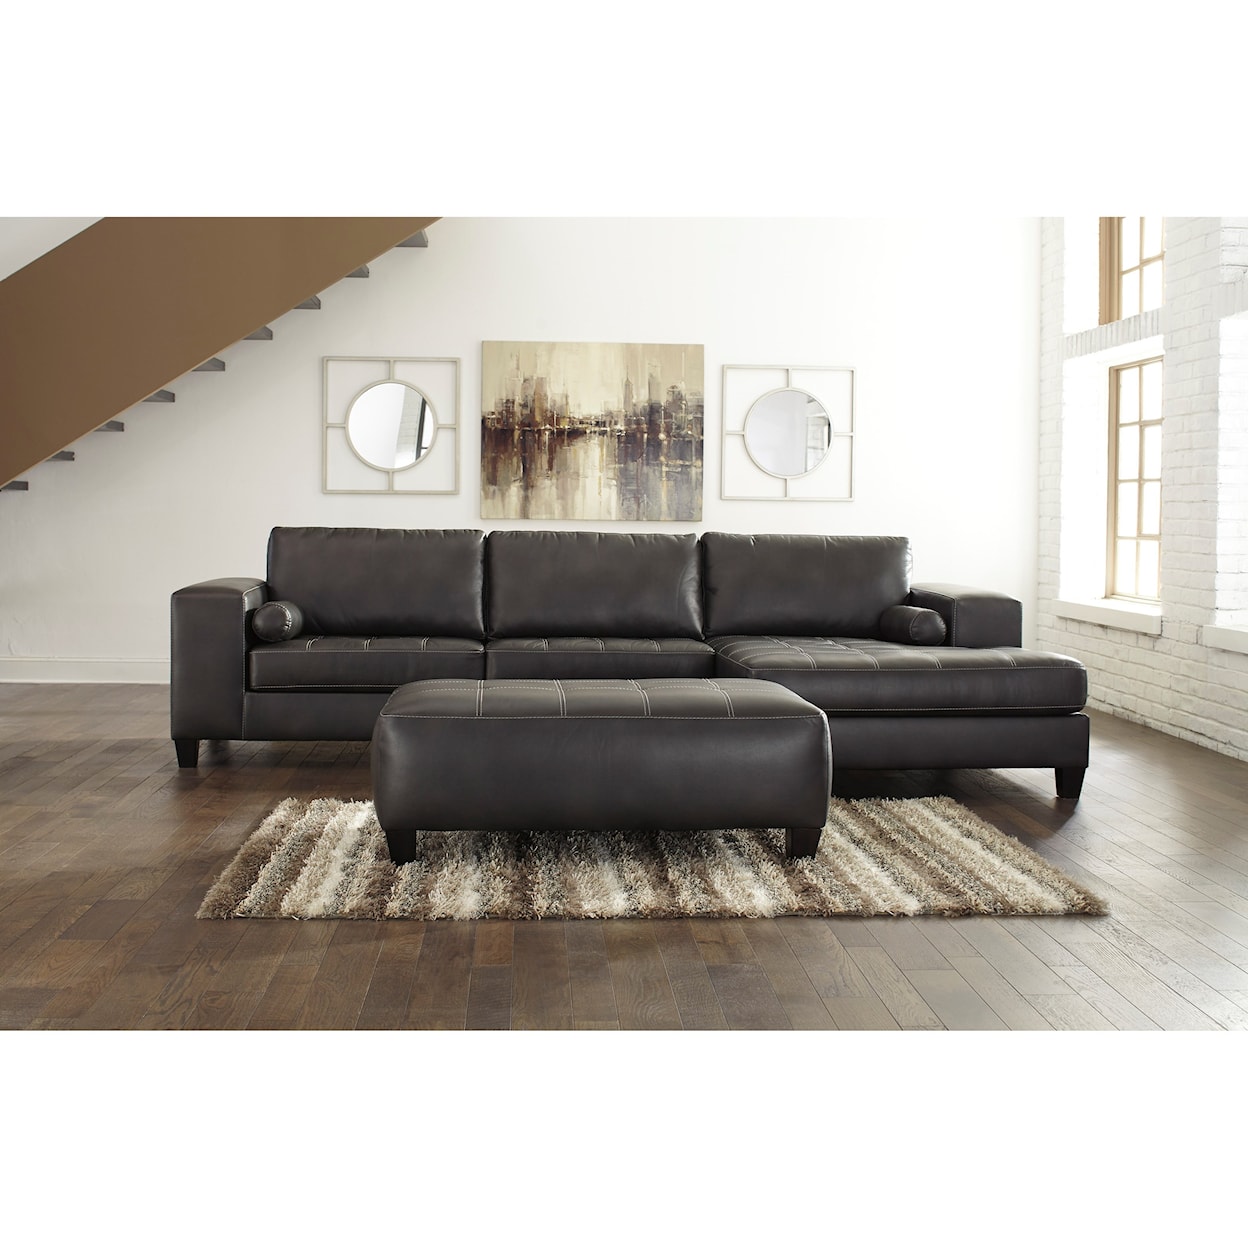 Signature NICO 2-Piece Sectional with Ottoman